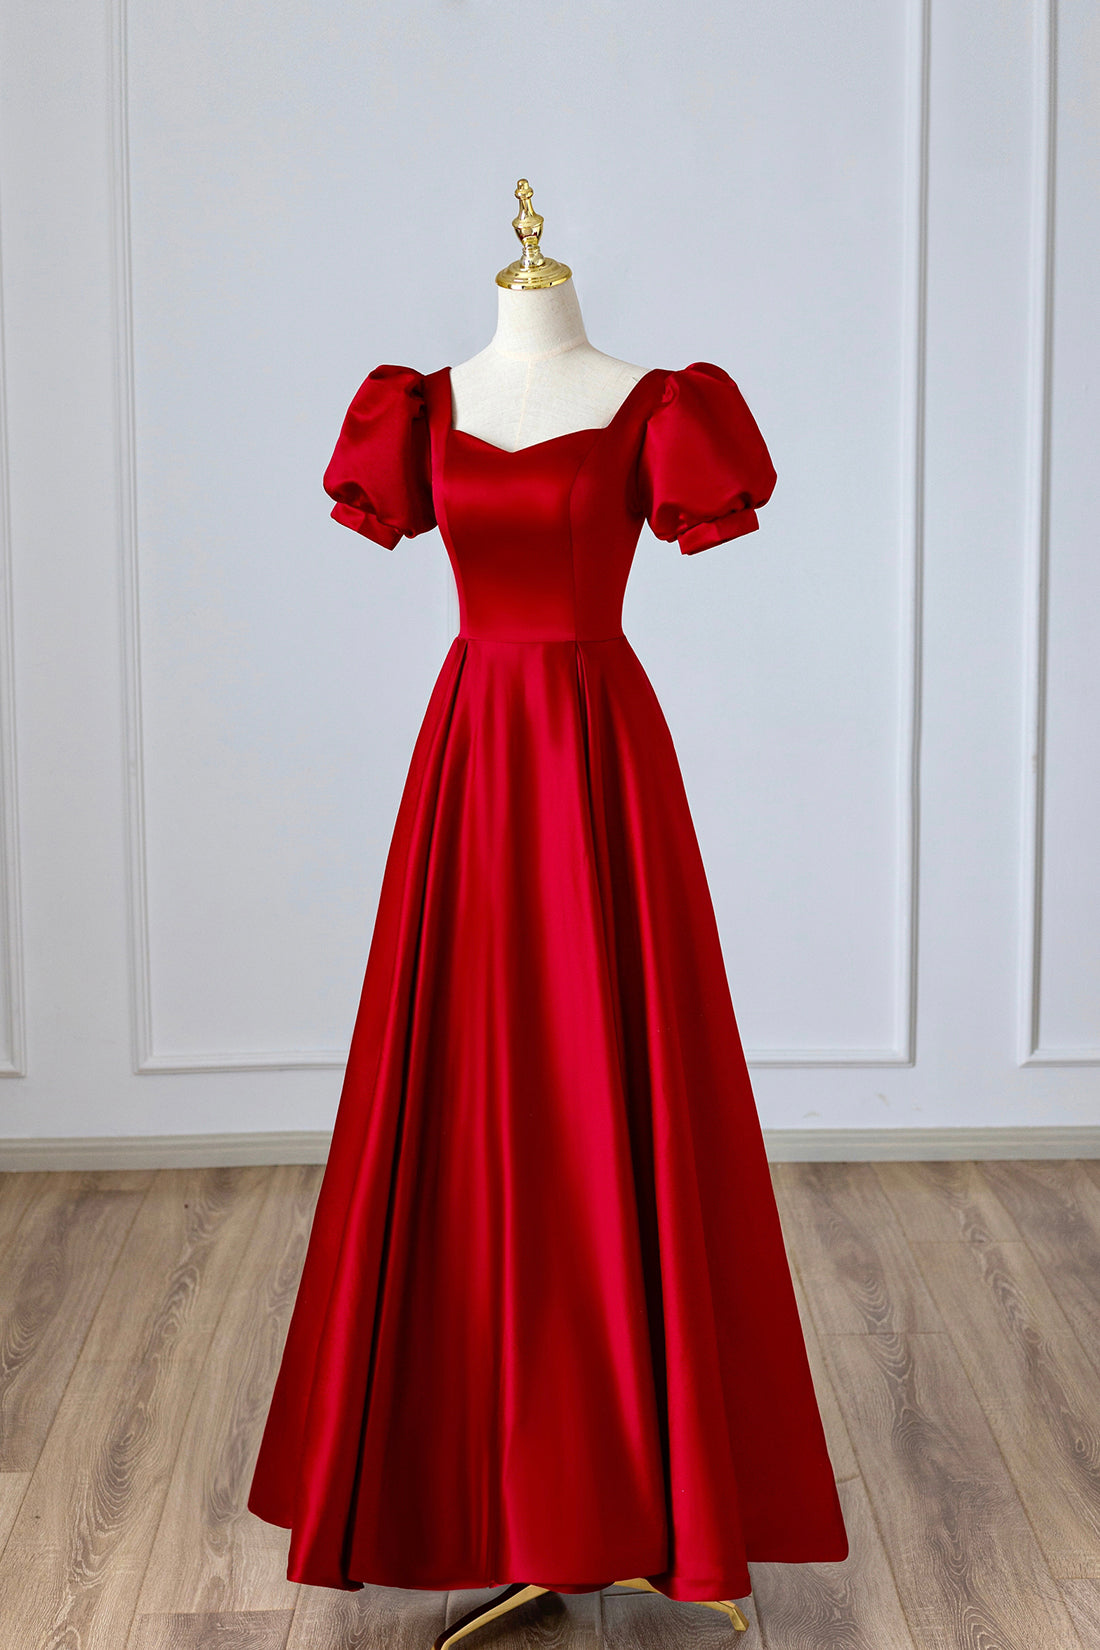 Red Satin Long Prom Dress Outfits For Girls, Simple A-Line Short Sleeve Evening Party Dress